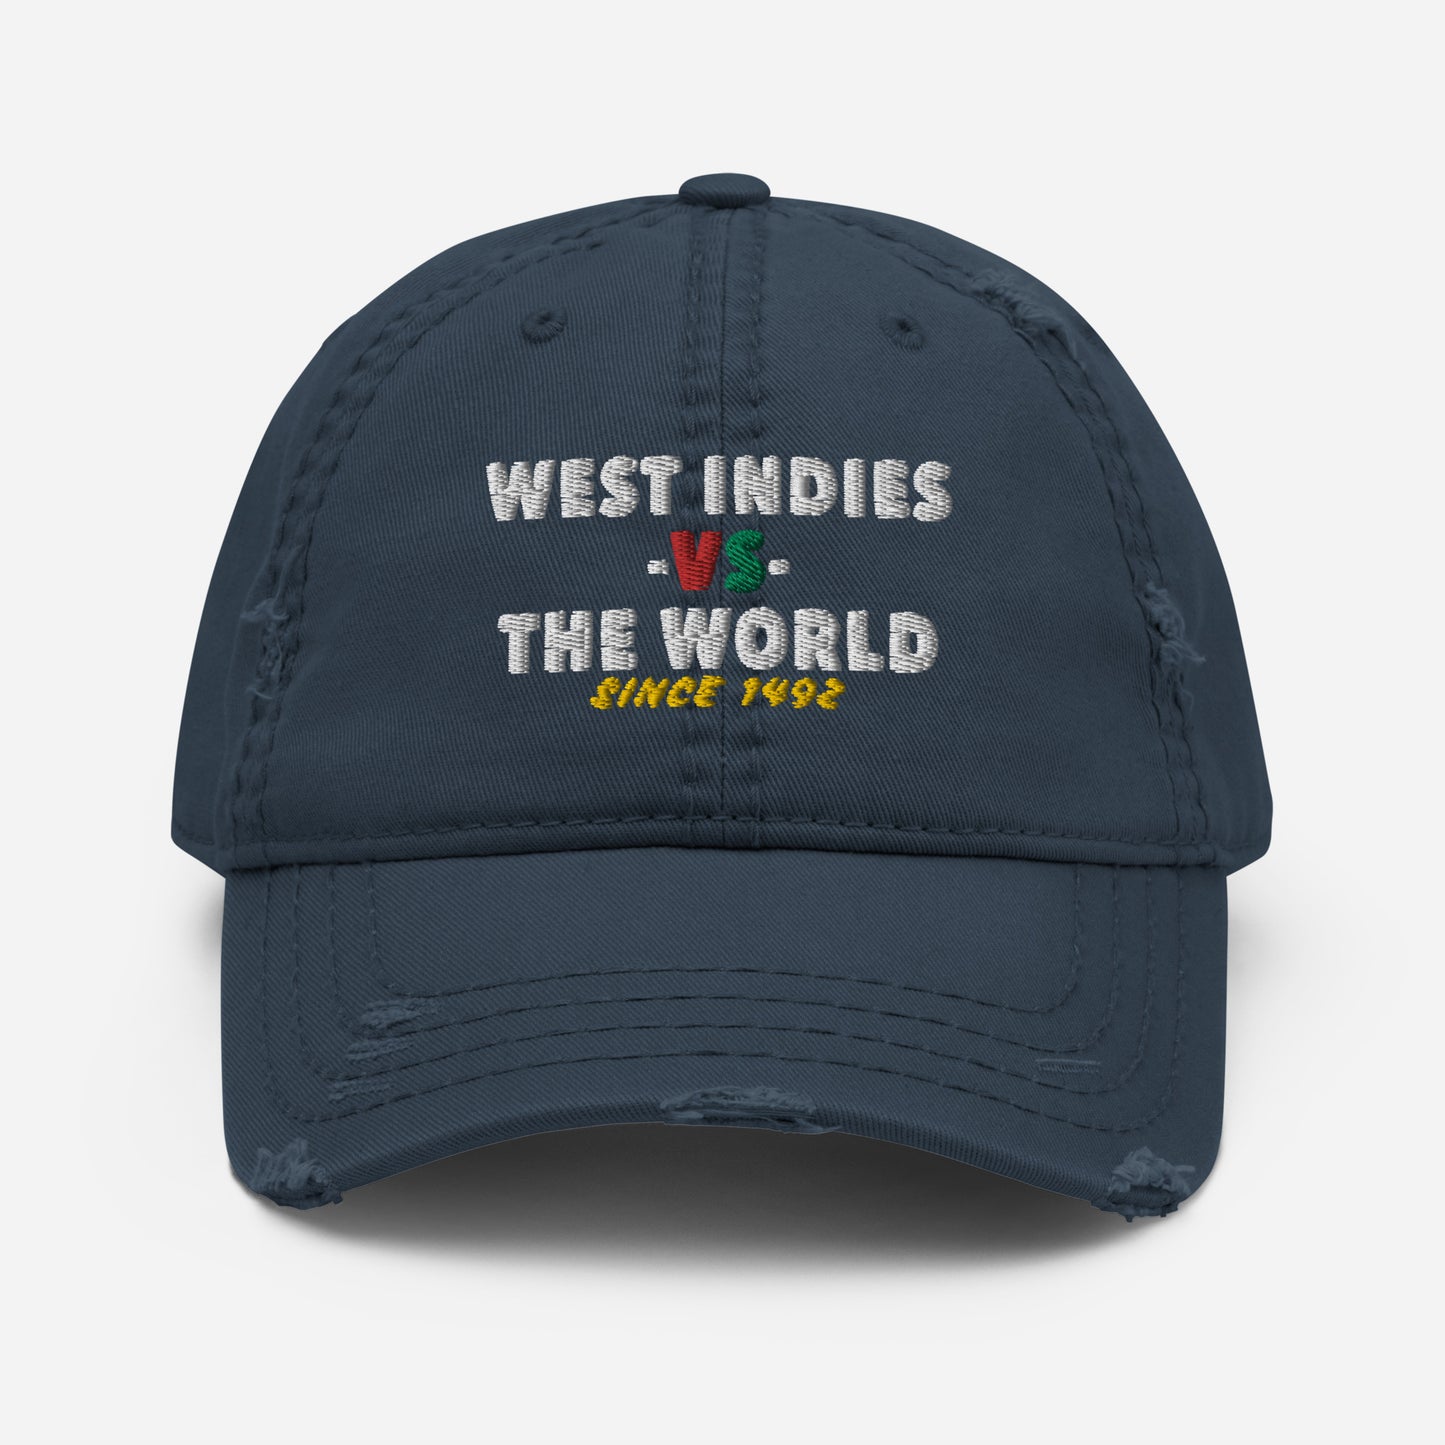 West Indies -vs- The World Distressed Dad Hat